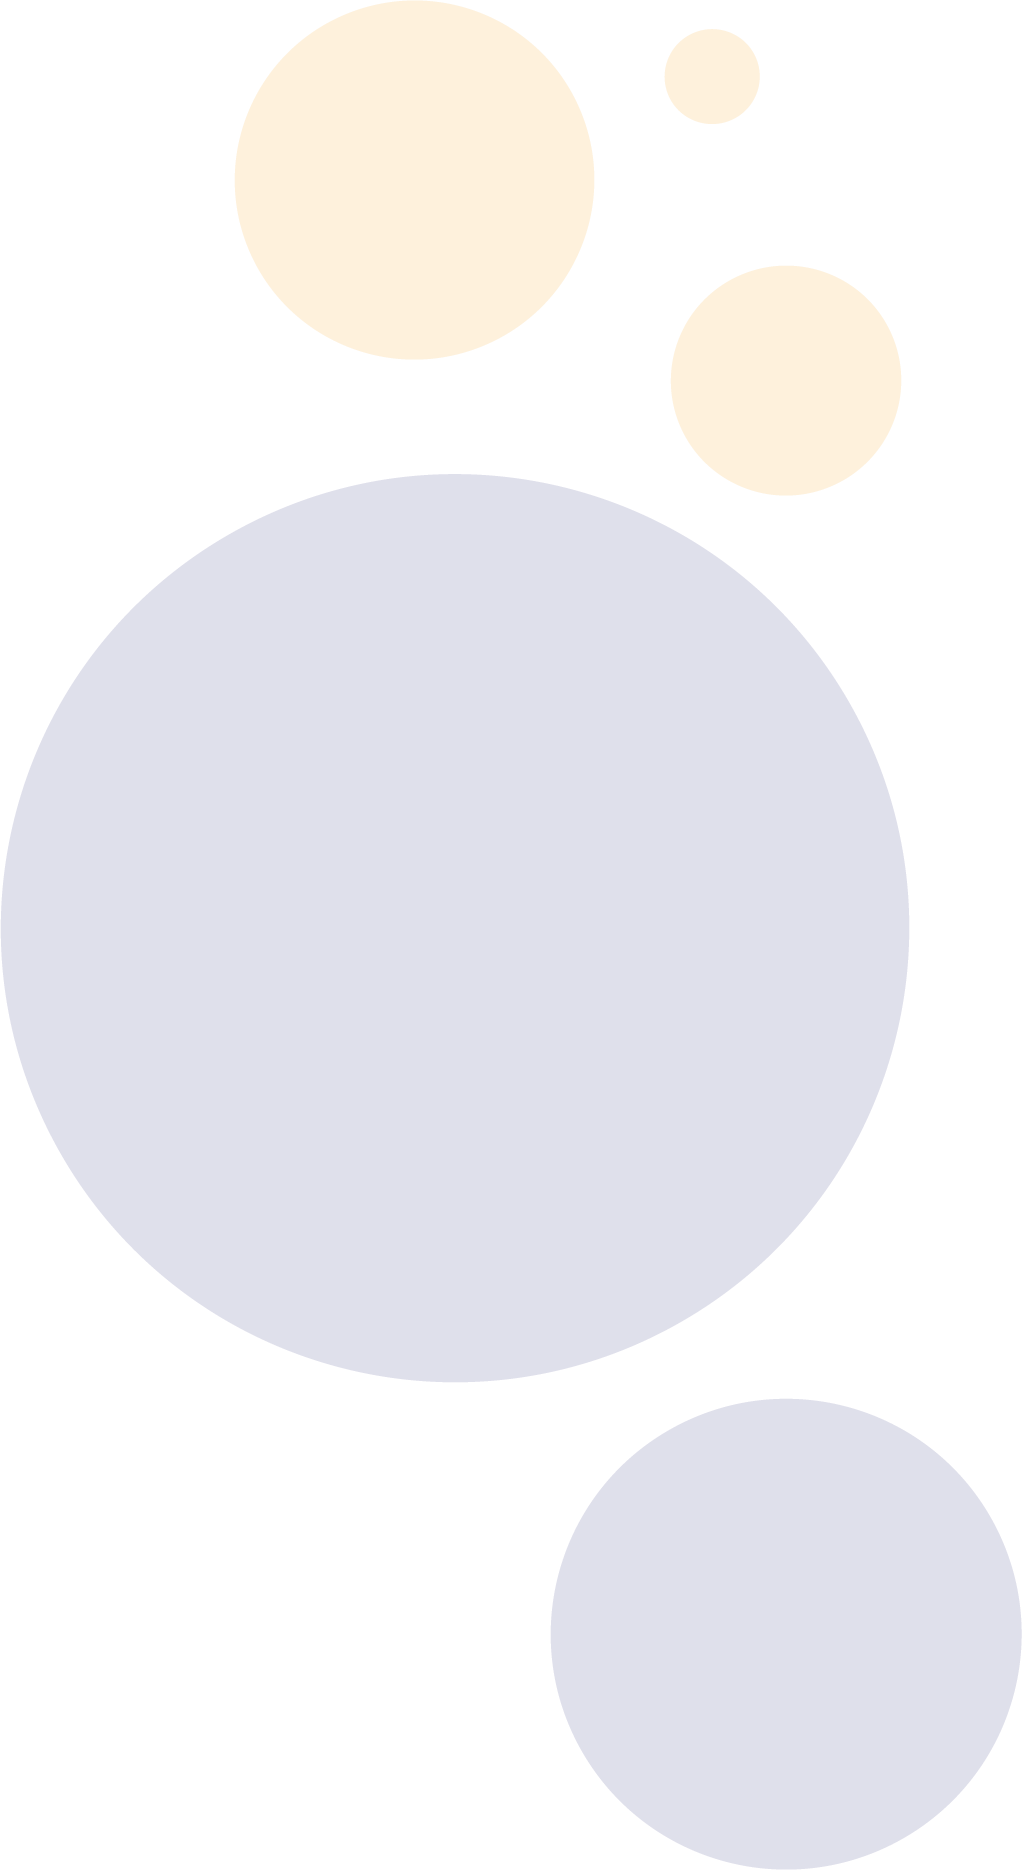 abstract image of yellow and purple circles